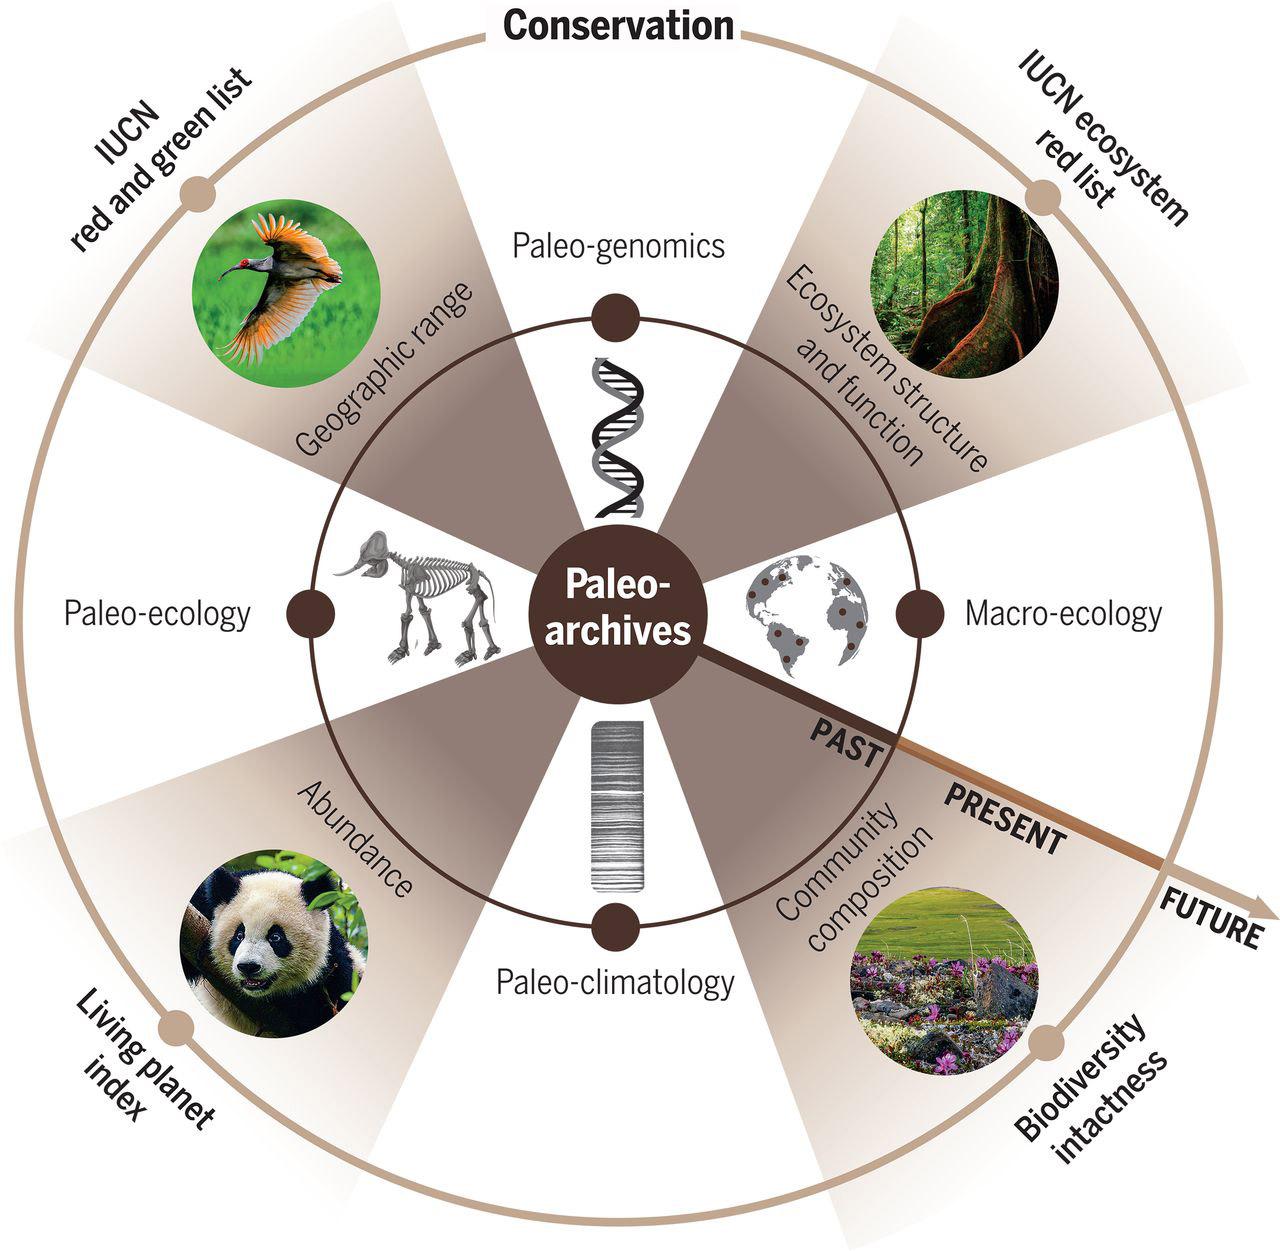 Paleo-archives offer new prospects for benchmarking and maintaining future biodiversity.